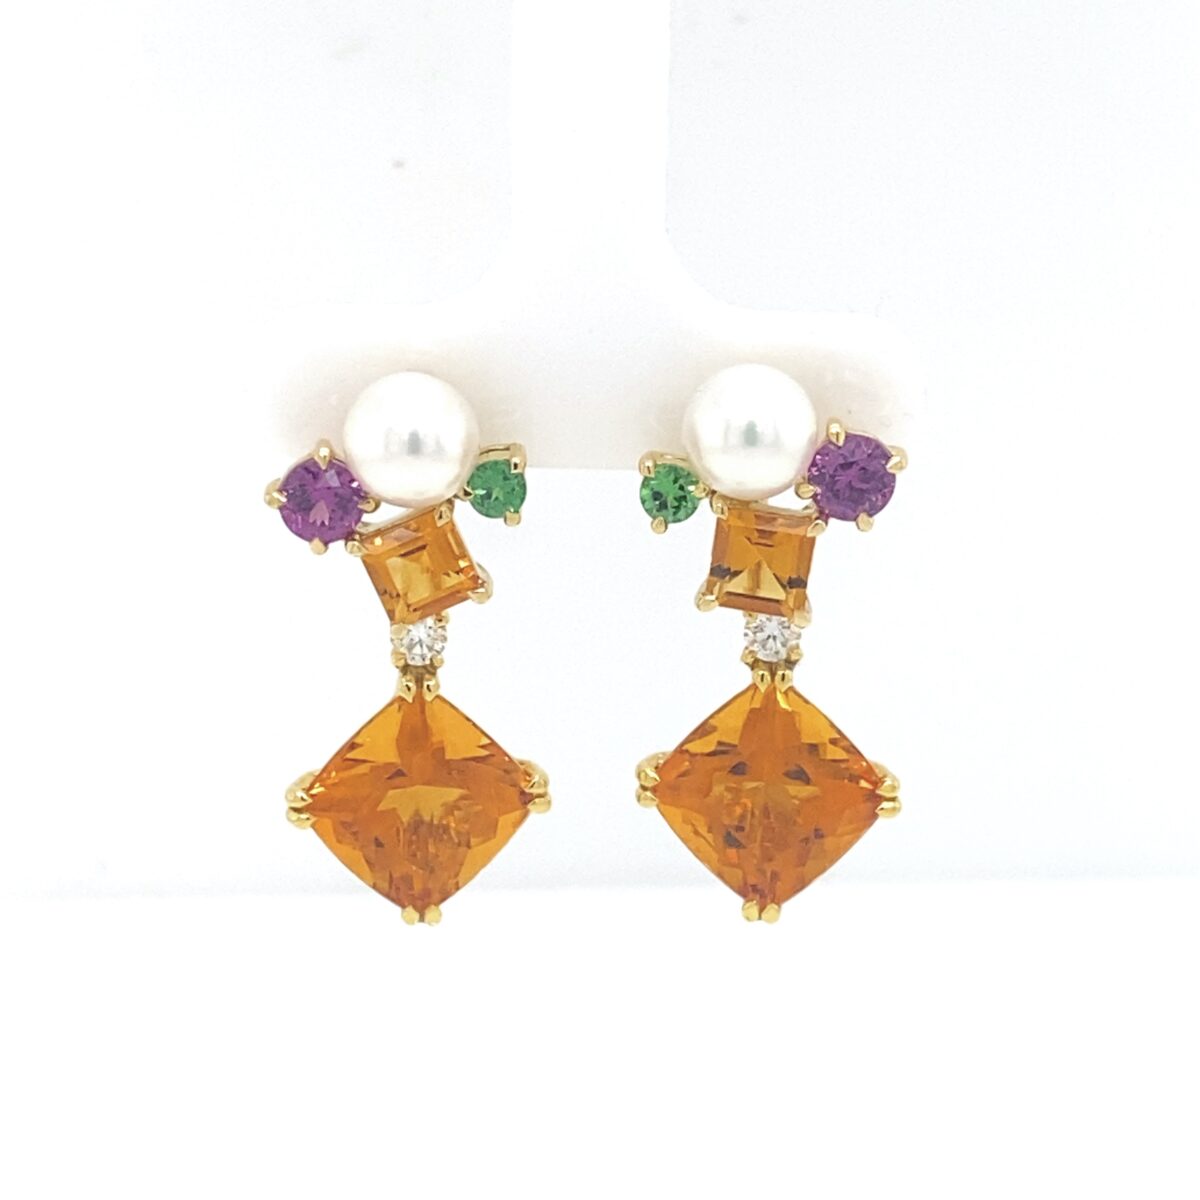 Scintilla earring with Citrine, Spessartine Garnet and Tsavorite Garnet and Pearl with square Citrine Gem Drops